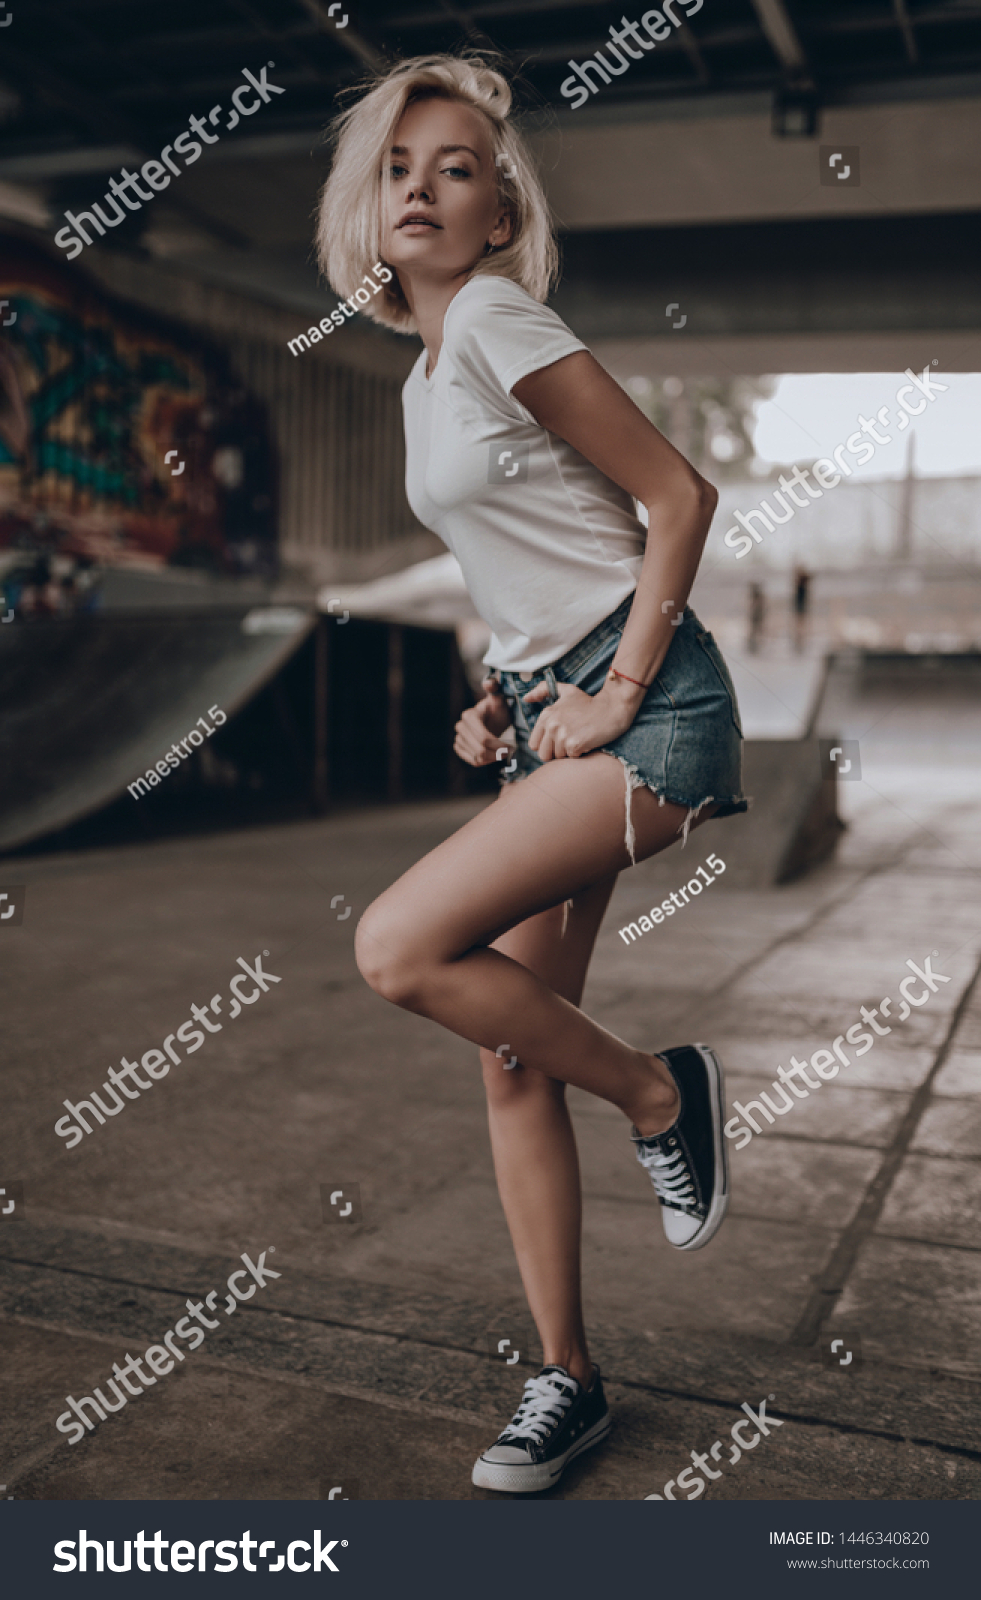 Cute Sexy Blonde Woman Casual Clothes Stock Photo 1446340820 | Shutterstock